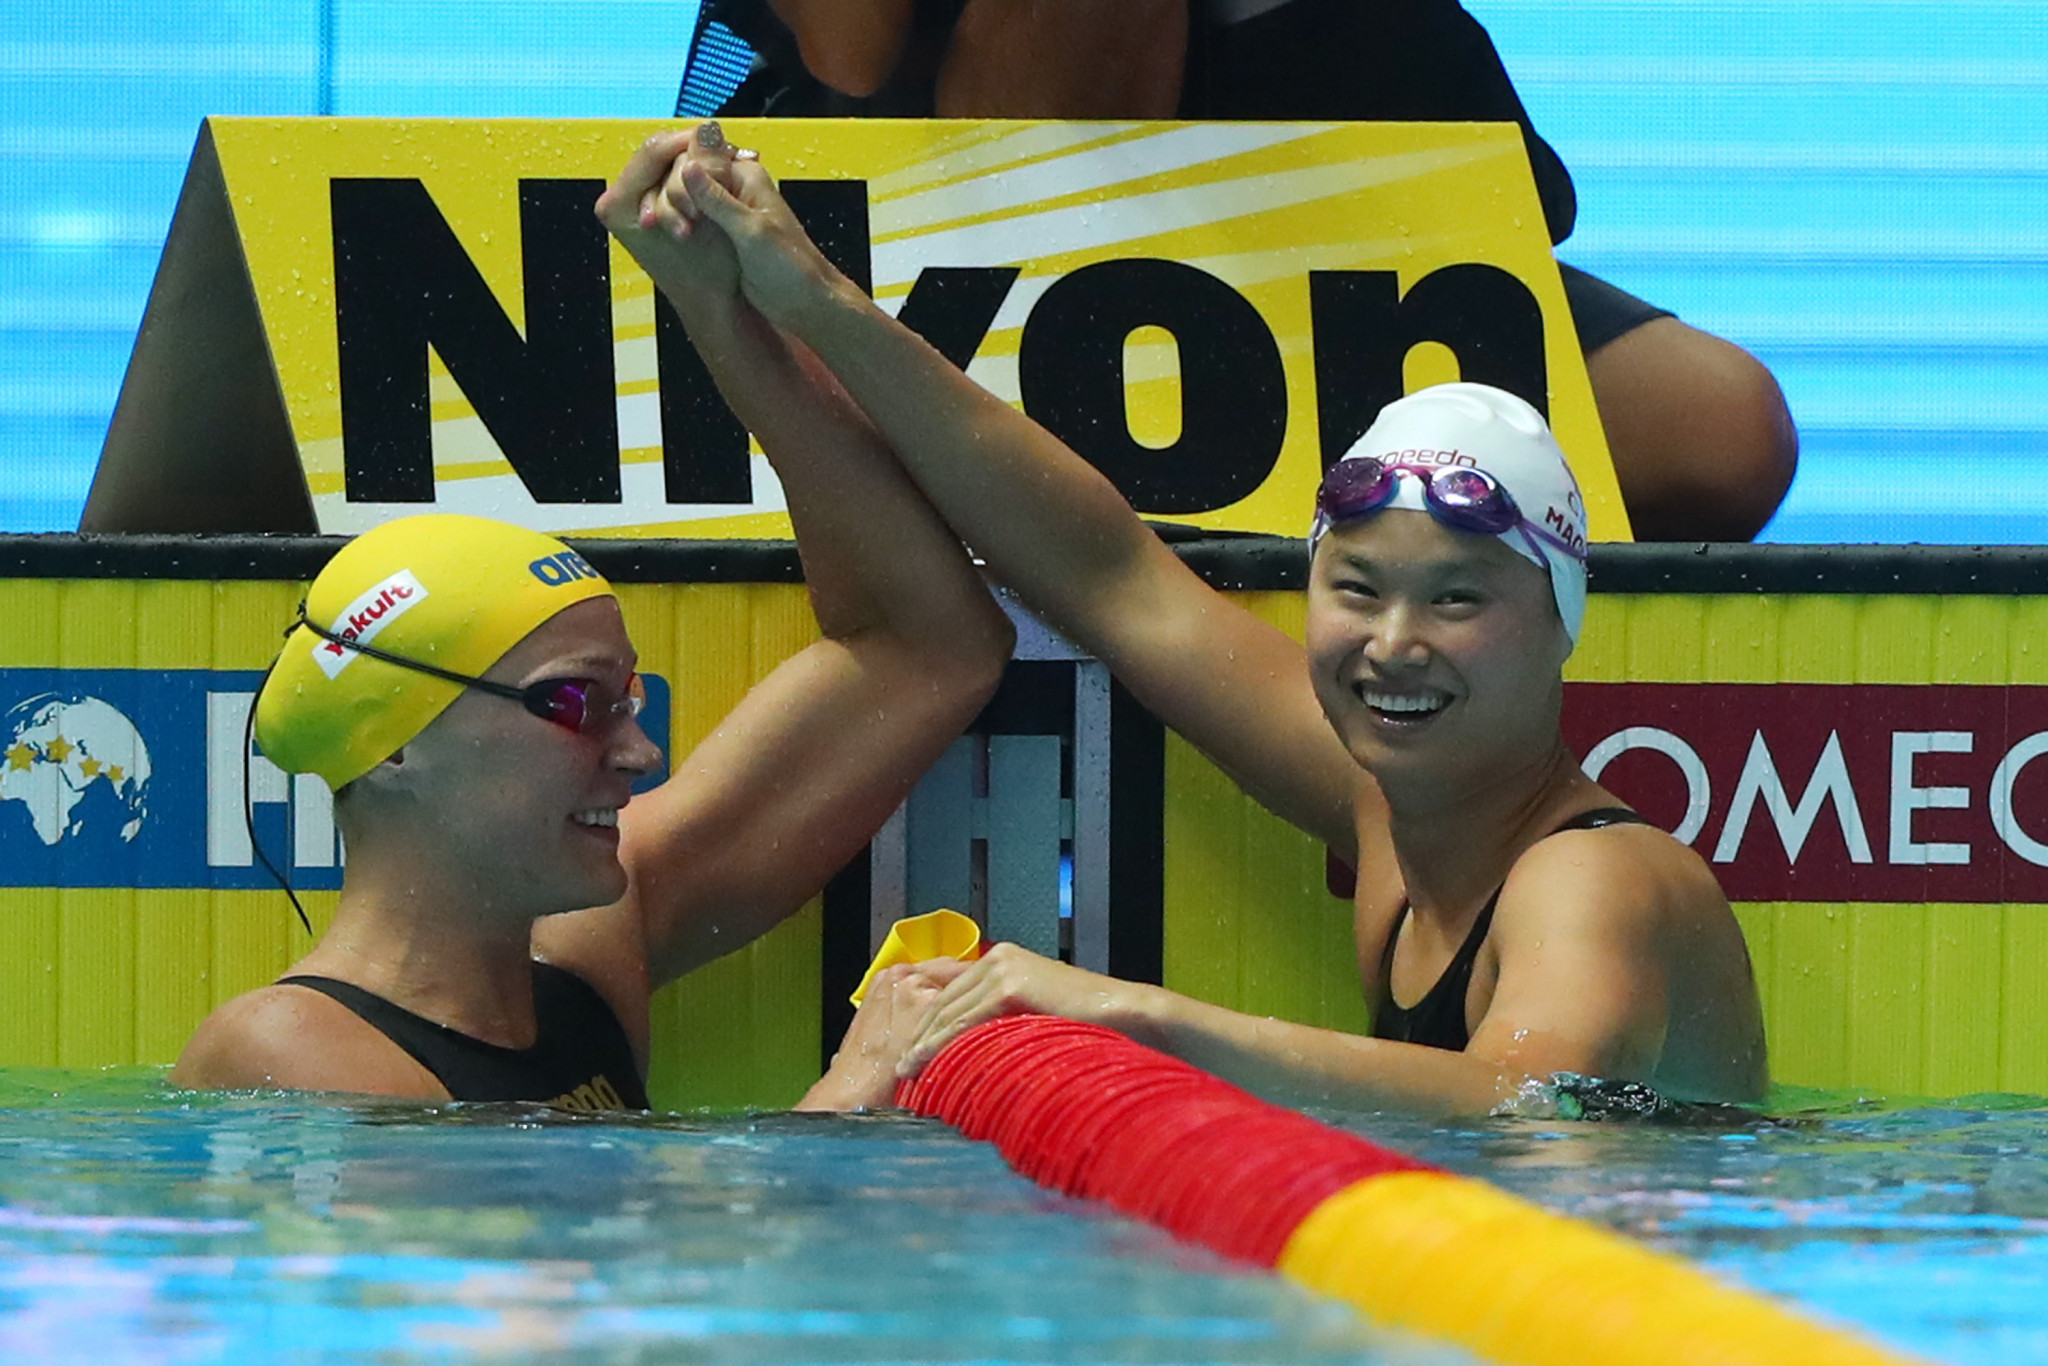 Canada's Maggie MacNeil, right, and Sarah Sjöström of Sweden were all smiles after claiming gold and silver medals respectively in the women's 100m butterfly final in Gwangju ©Getty Images 